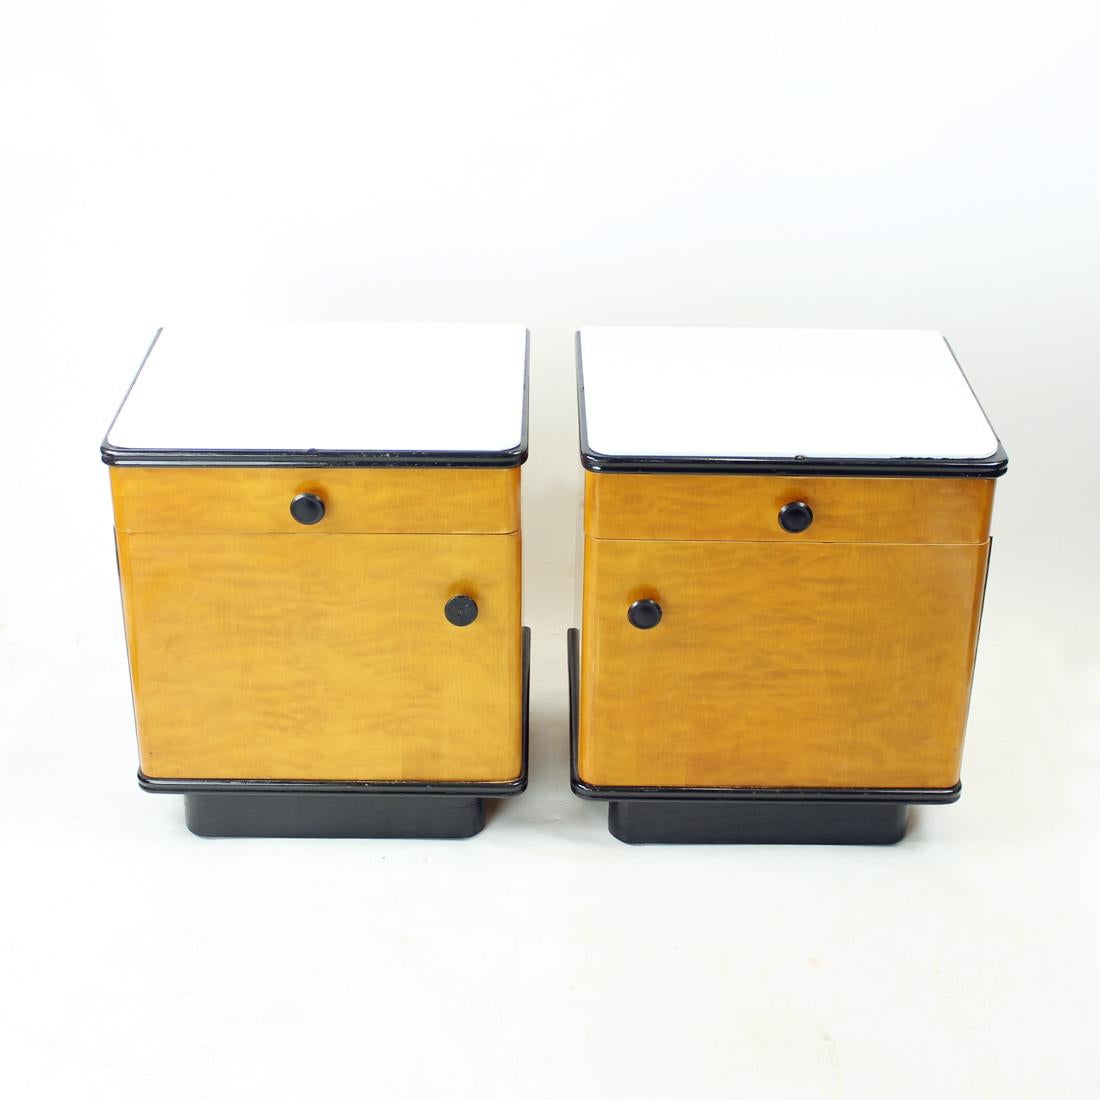 Beautiful set of two bedside tables. Produced in Czechoslovakia by UP Zavody furniture company in 1960s, original stamps of the series still visible on the back. Marked as the Series 7, 635. The tables are of rectangular shape with one drawer and a